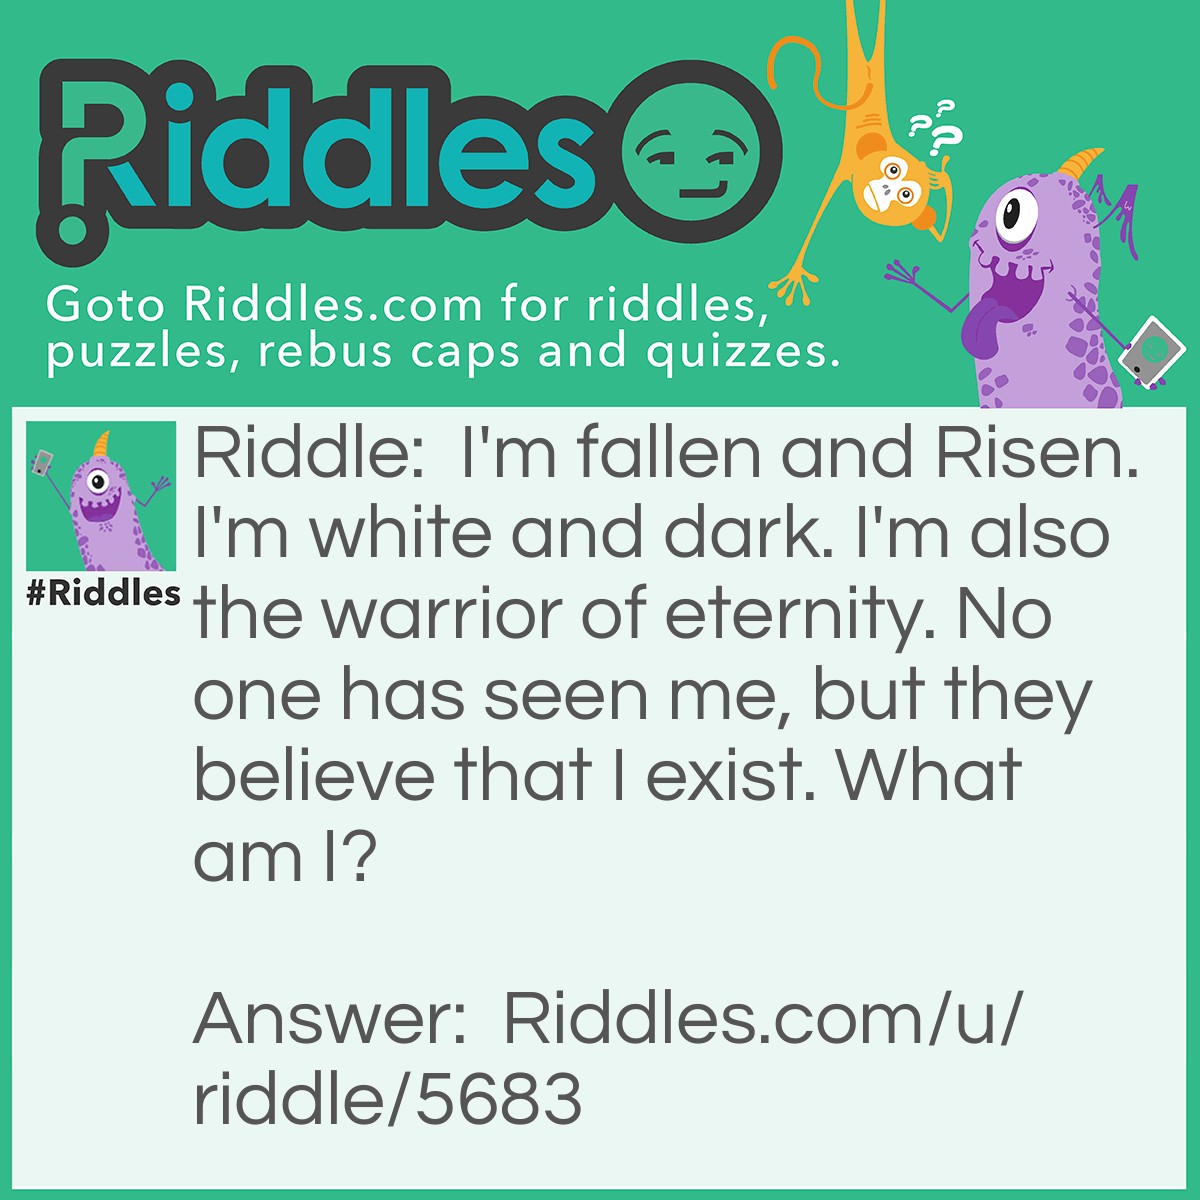 Riddle: I'm fallen and Risen. I'm white and dark. I'm also the warrior of eternity. No one has seen me, but they believe that I exist. What am I? Answer: Angel.